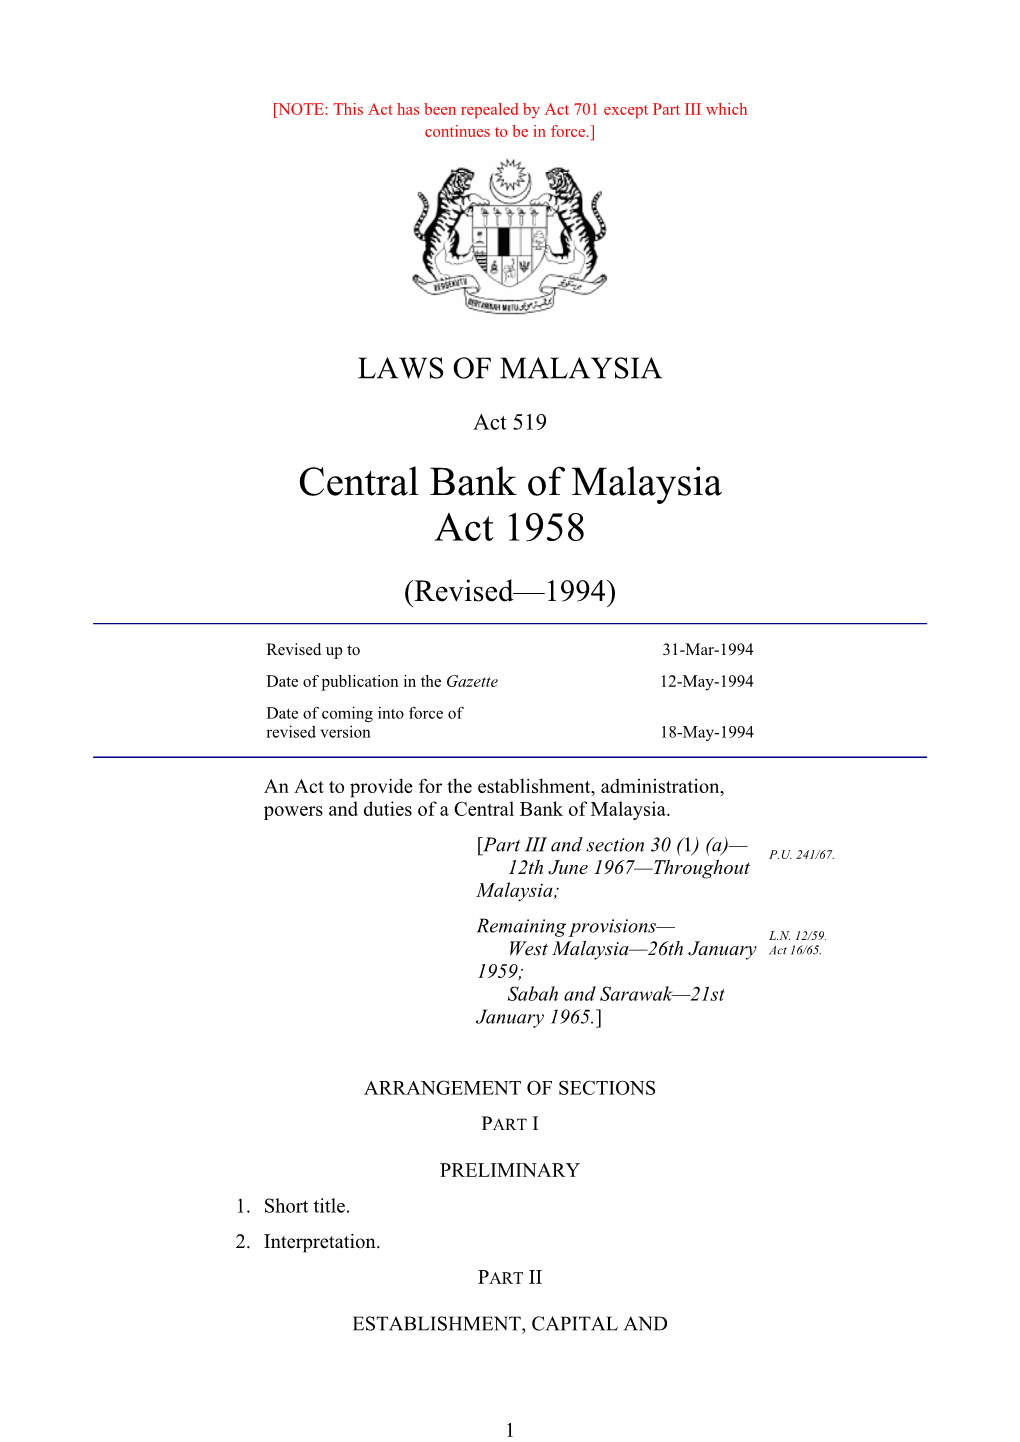 Central Bank of Malaysia Act 1958 (Revised—1994)